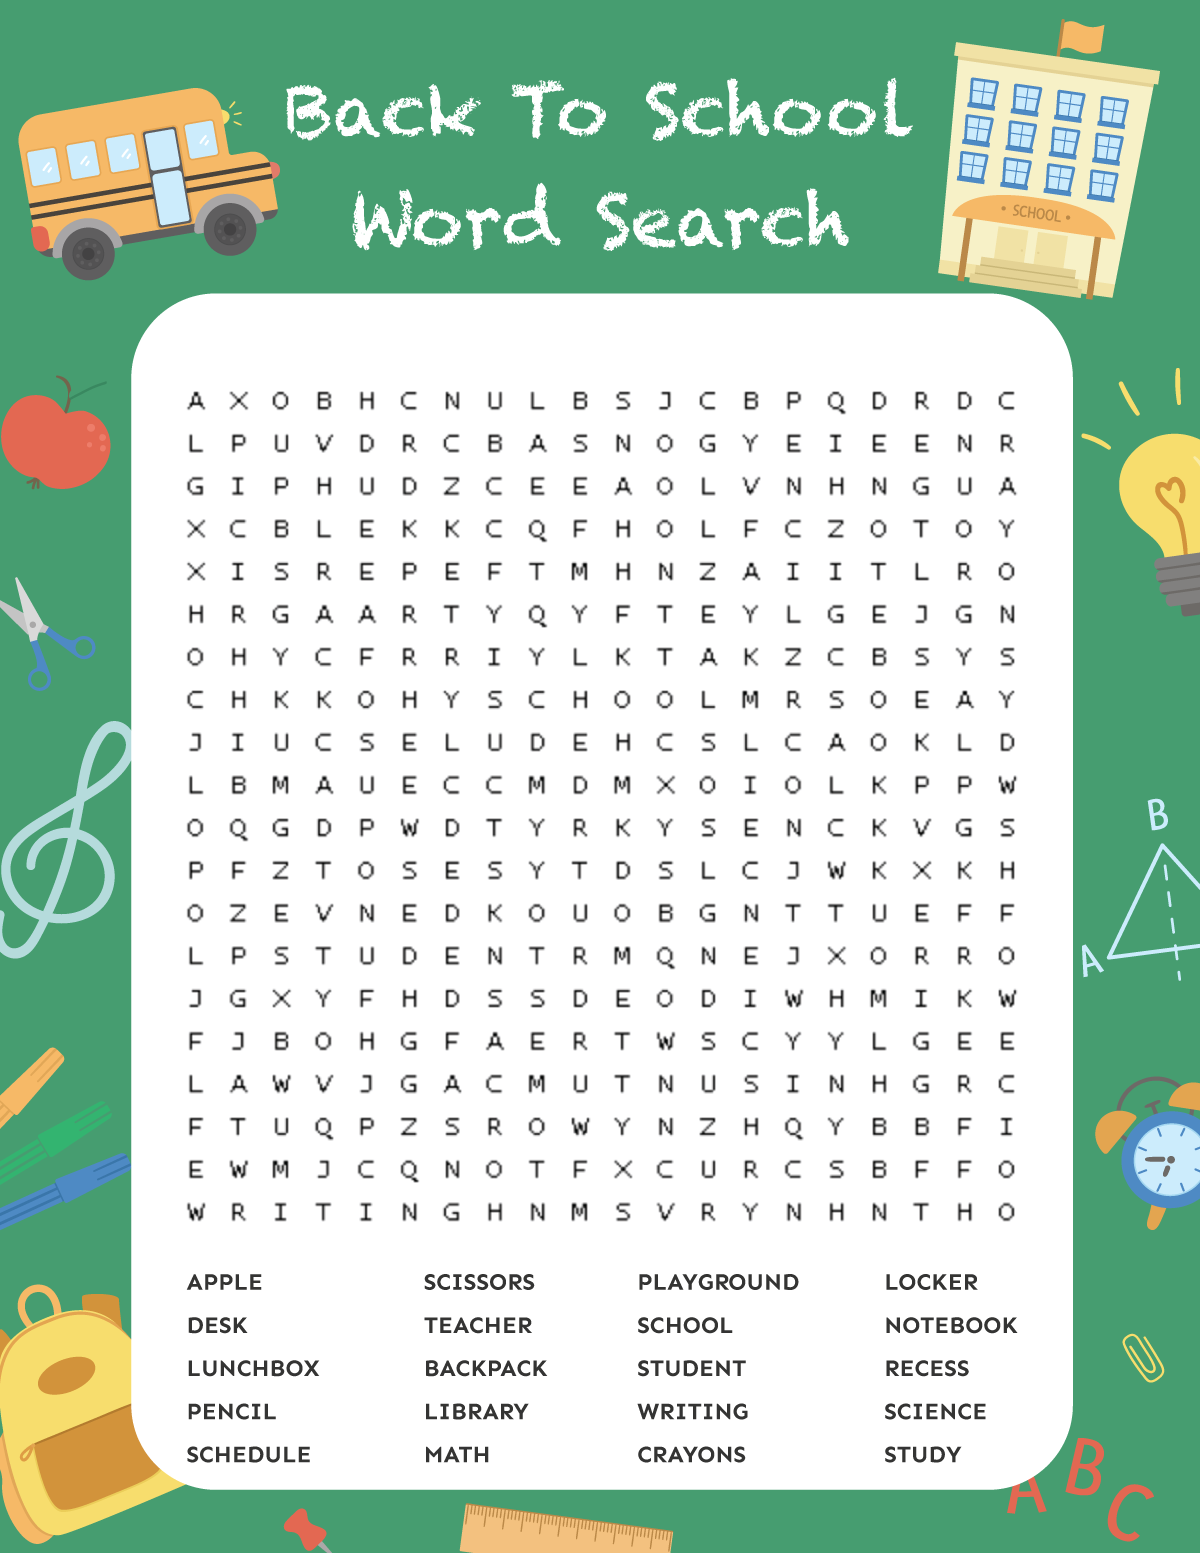 Back to school word search with a green background